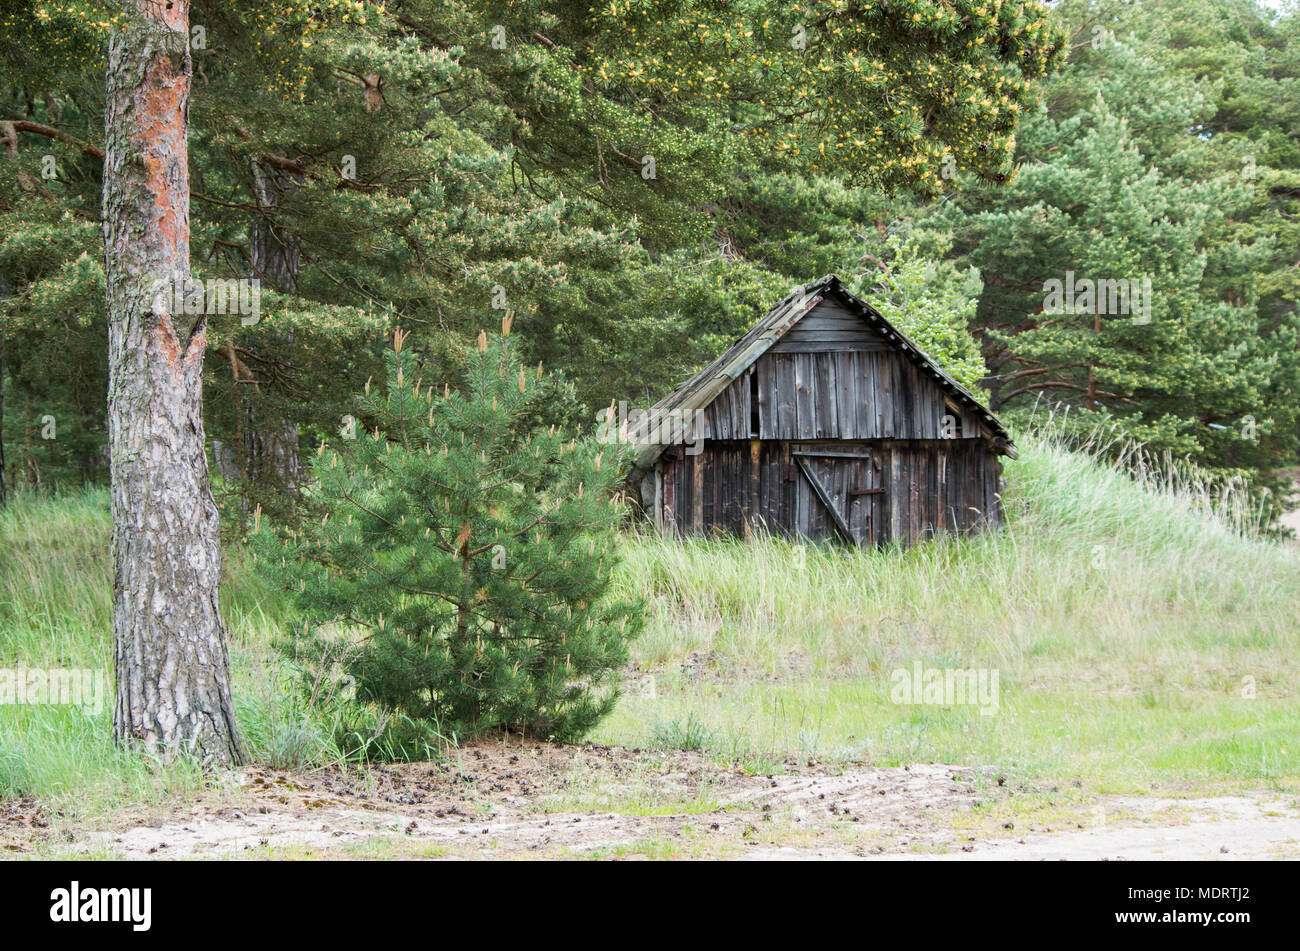 An old wooden hut overgrown by grass in the nature of Estonian island of Prangli surrounded by pine trees. Stock Photo